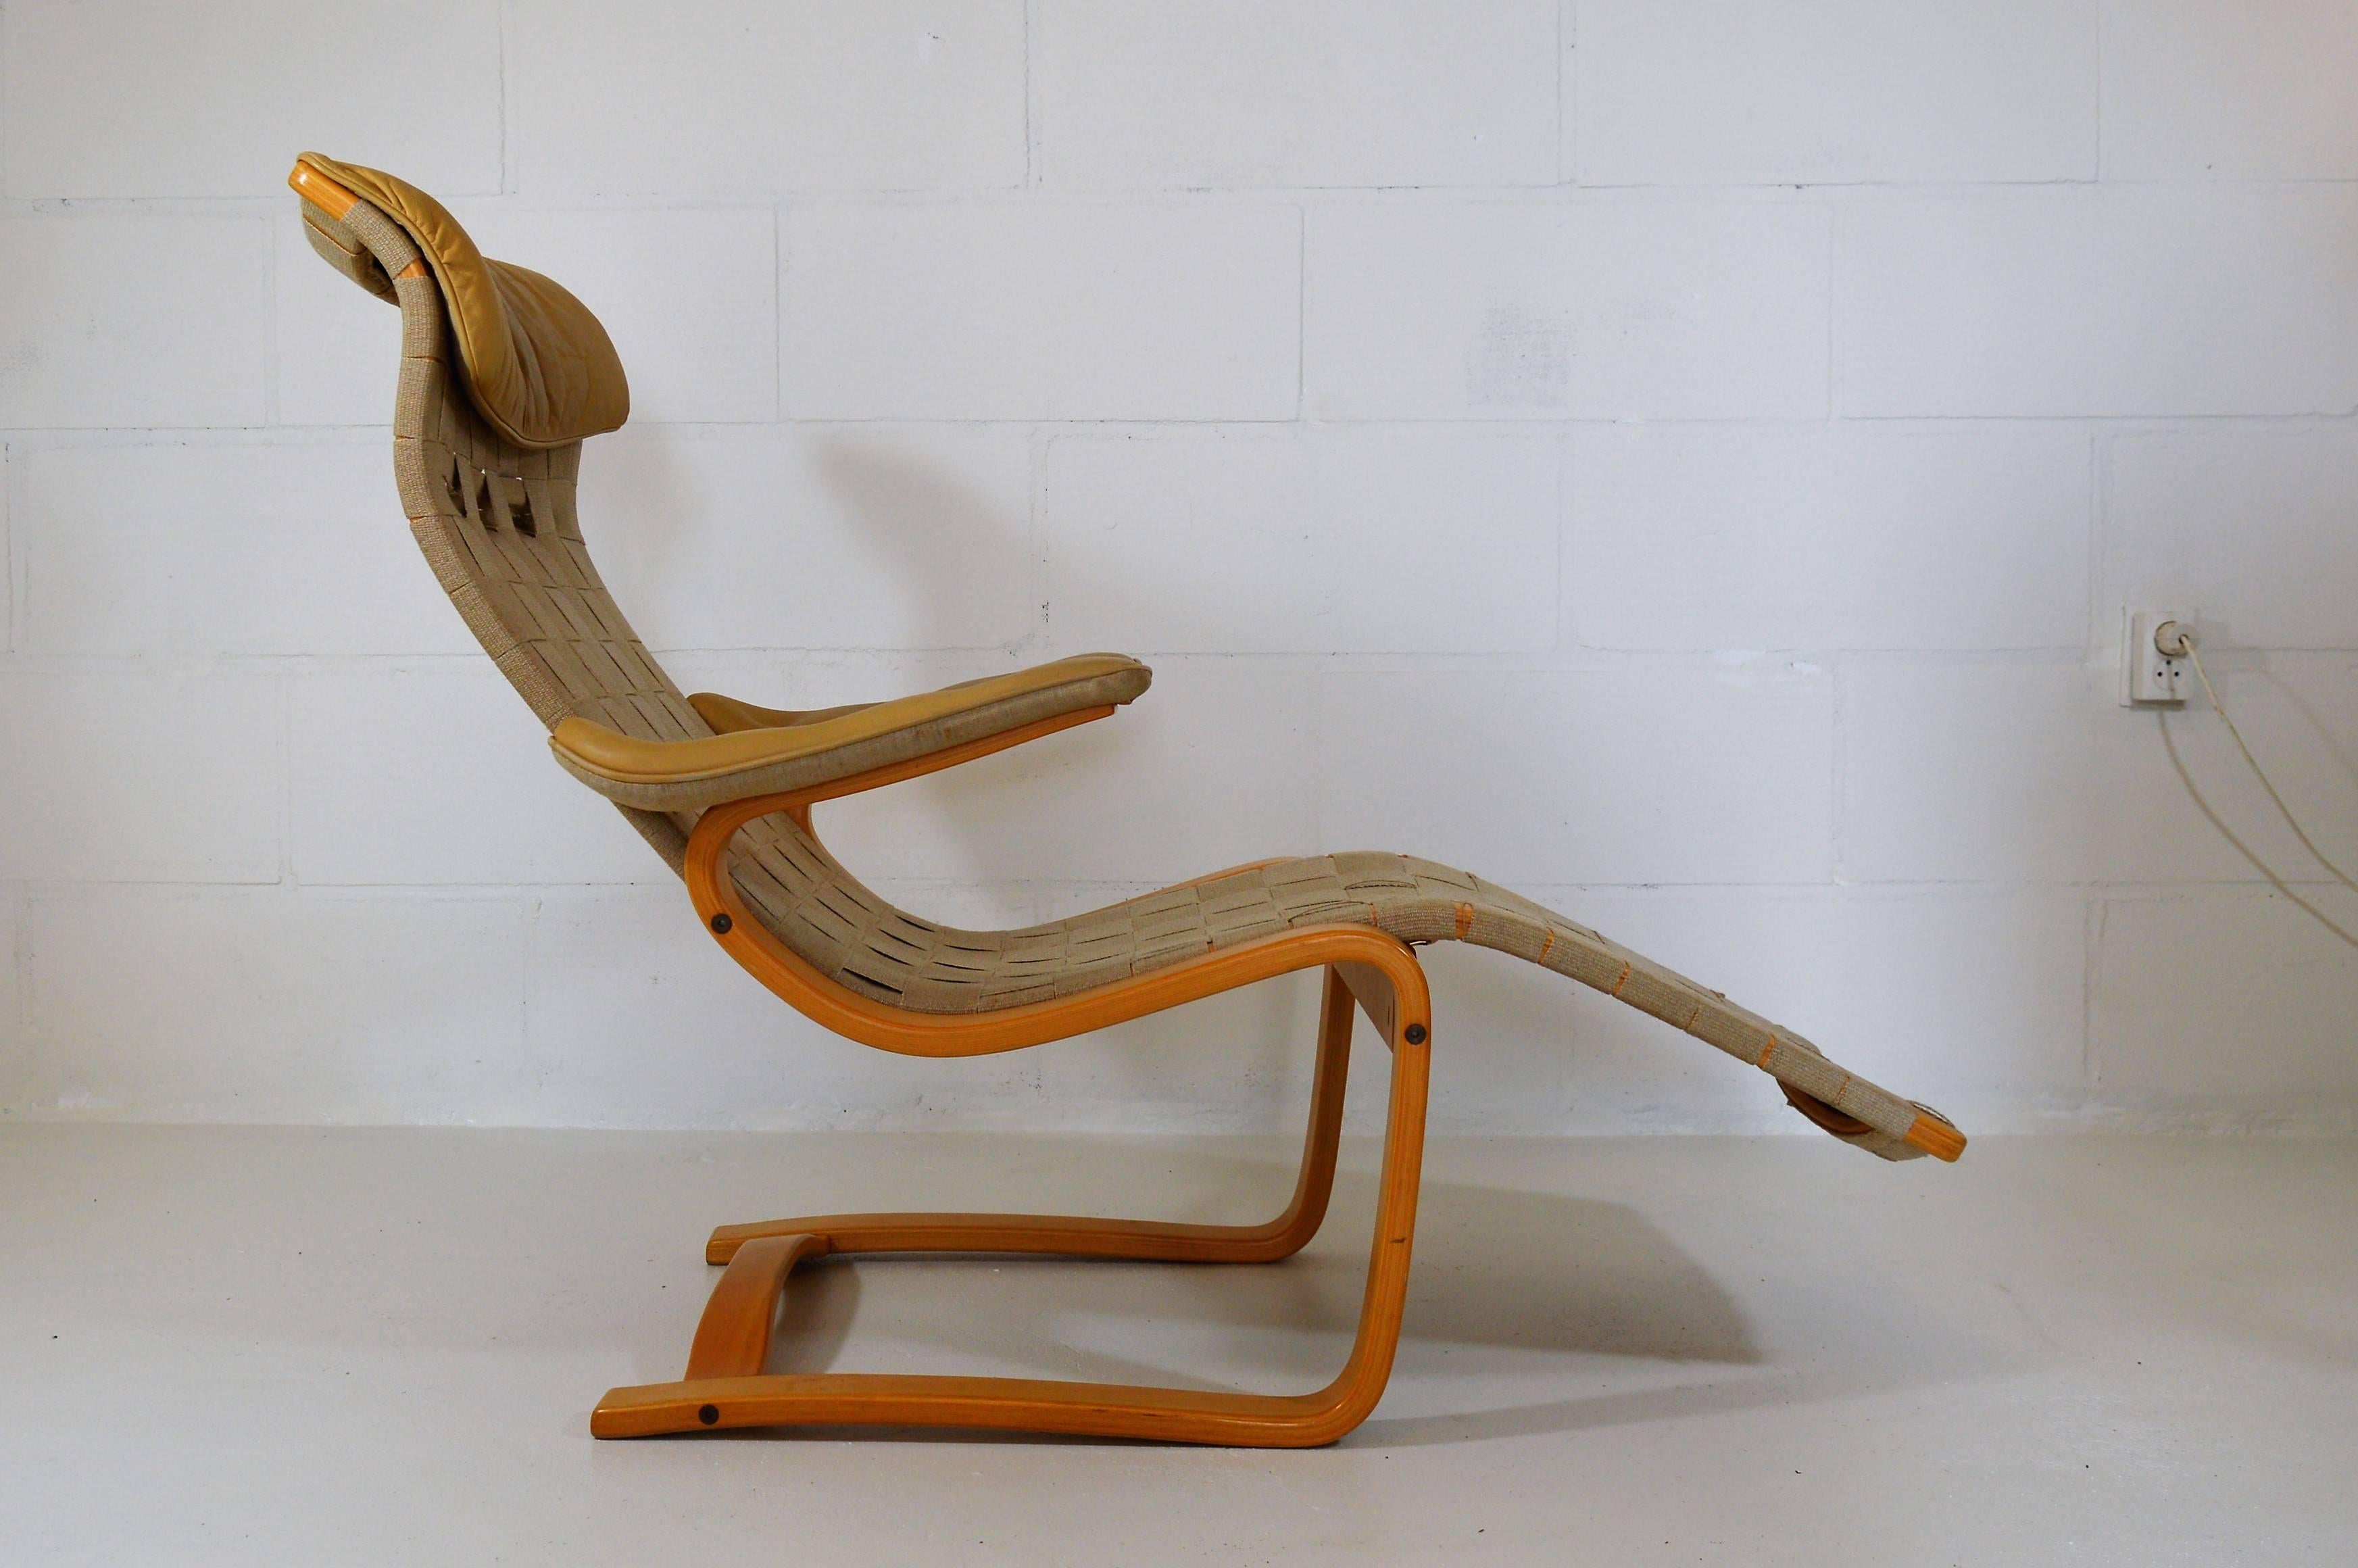 Elegant and very comfortable lounge chair in laminated birch bentwood with original cotton webbing and leather to arms and back pillow, designed by Gustaf Axel Berg (who worked with Arne Jacobsen on the early egg chair design). Stamped at bottom 